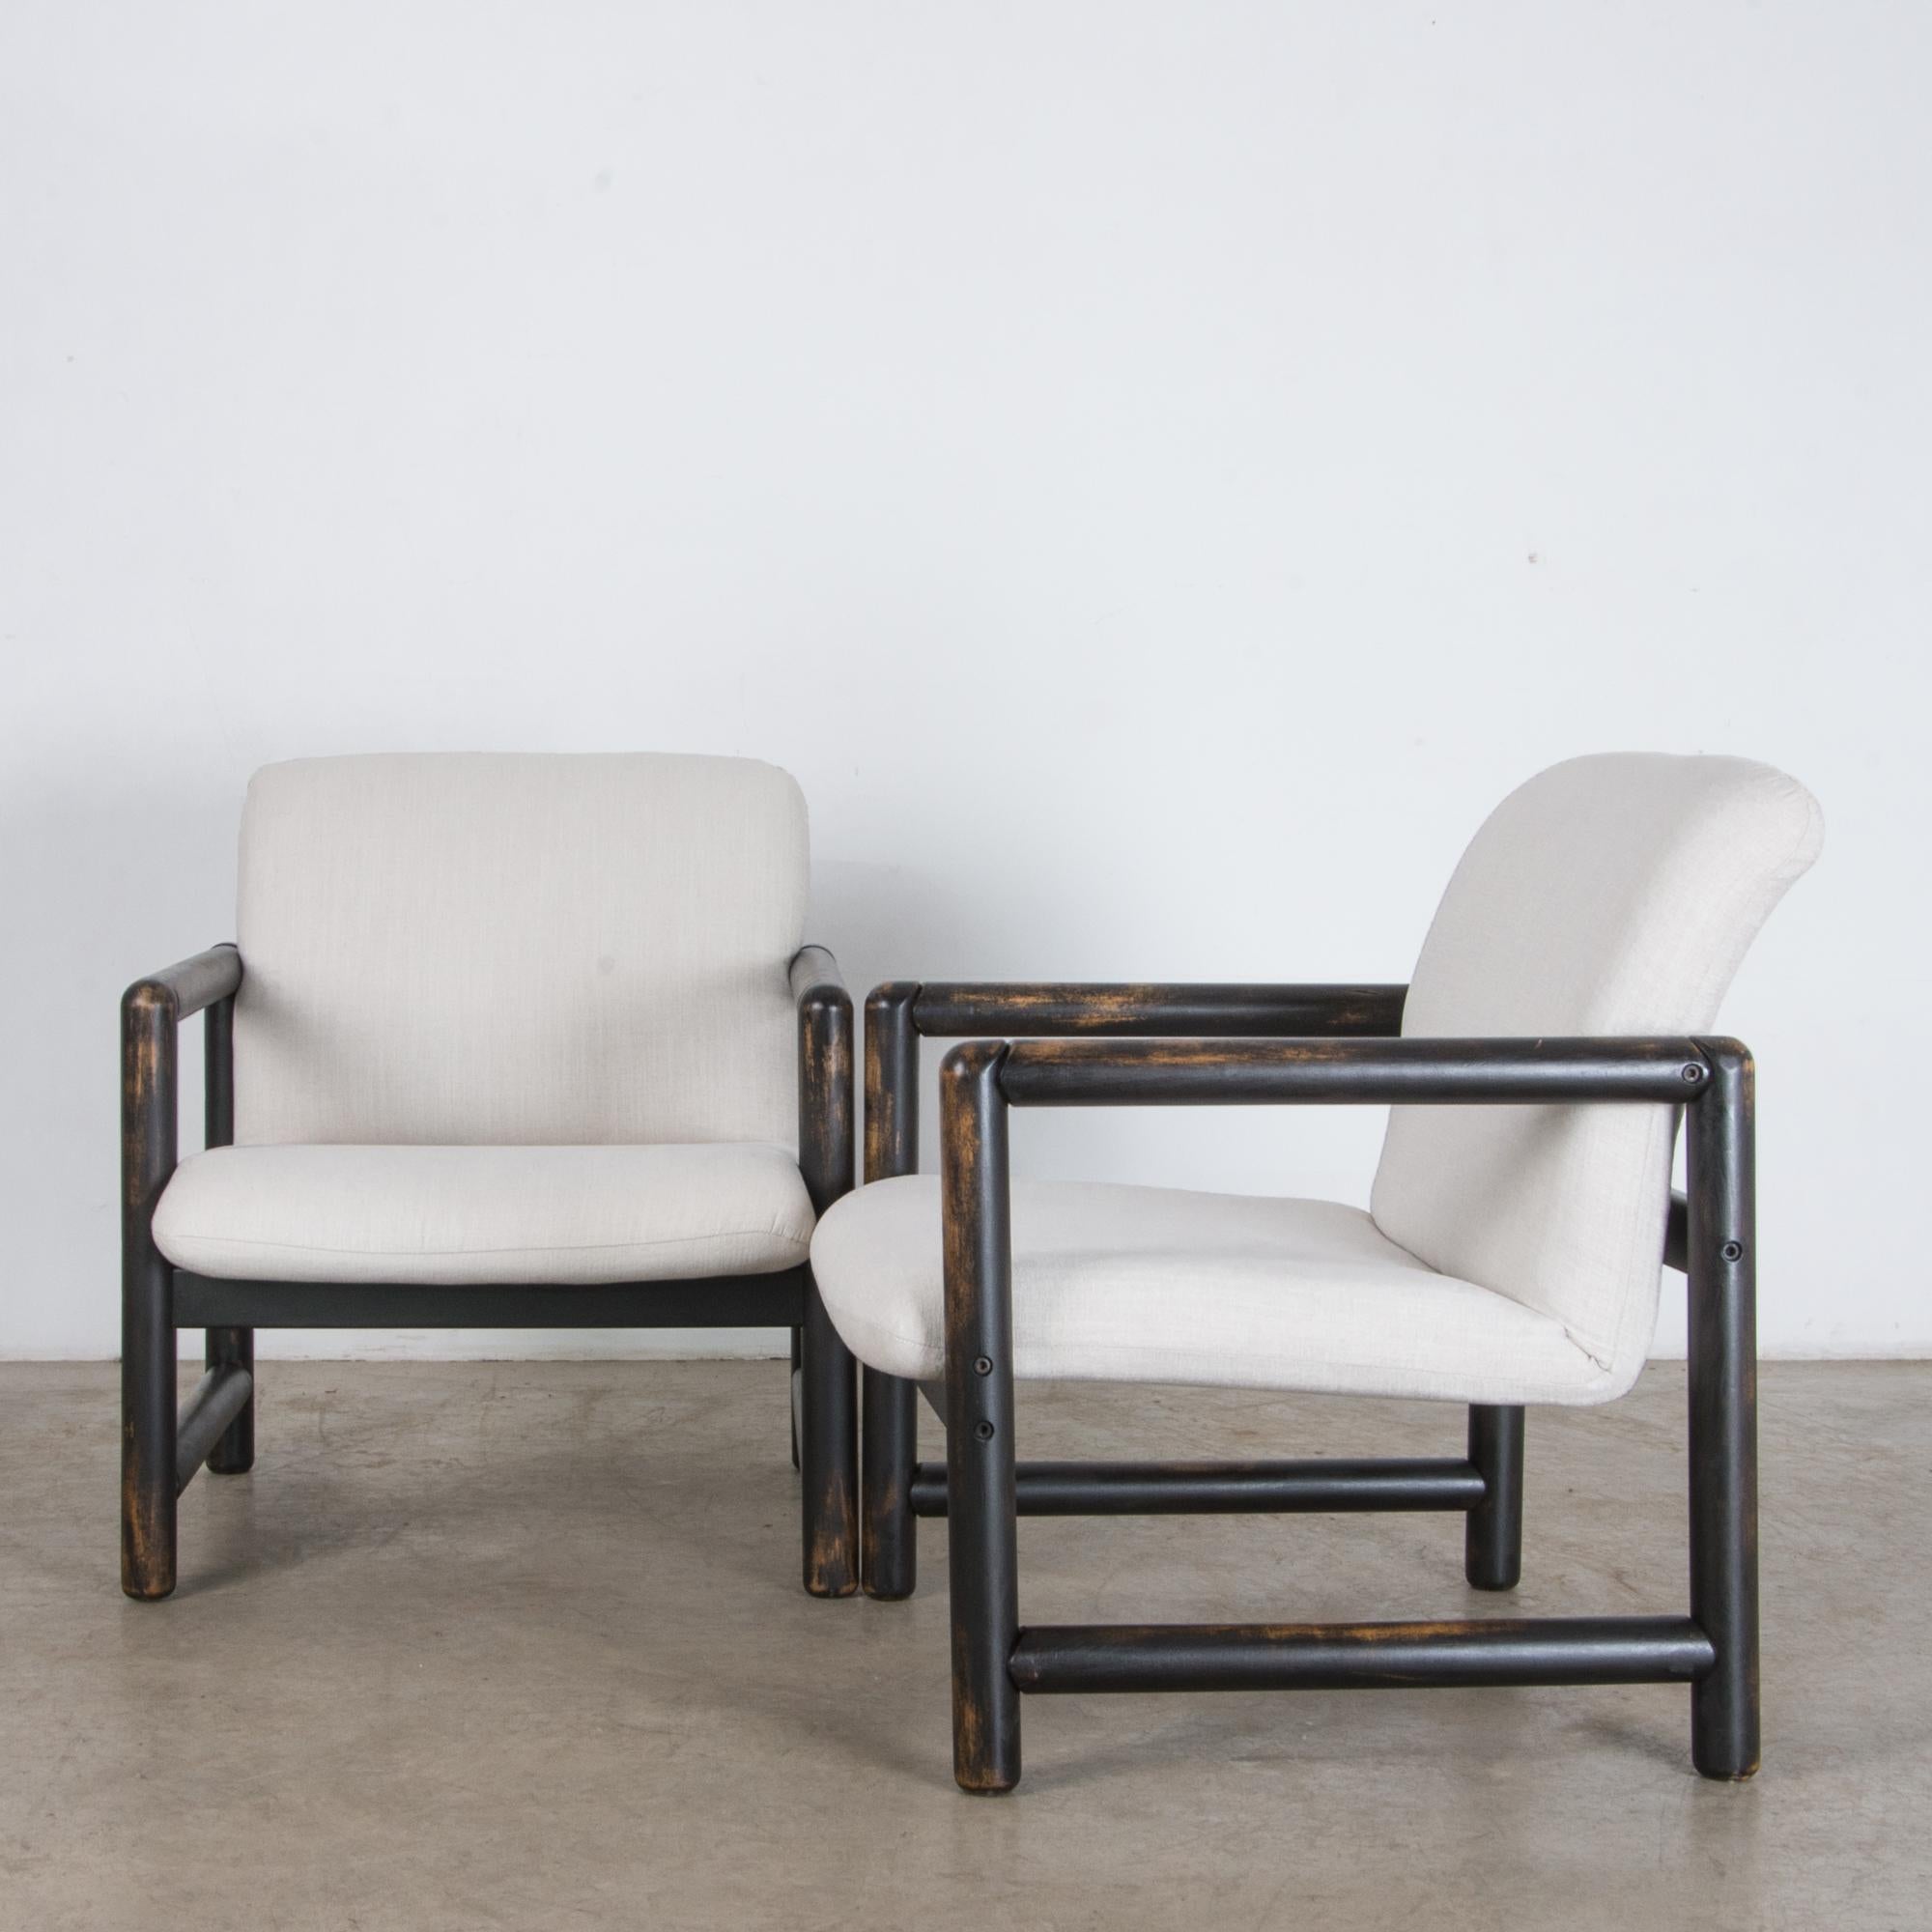 Late 20th Century 1980s Czech Upholstered Armchairs, a Pair